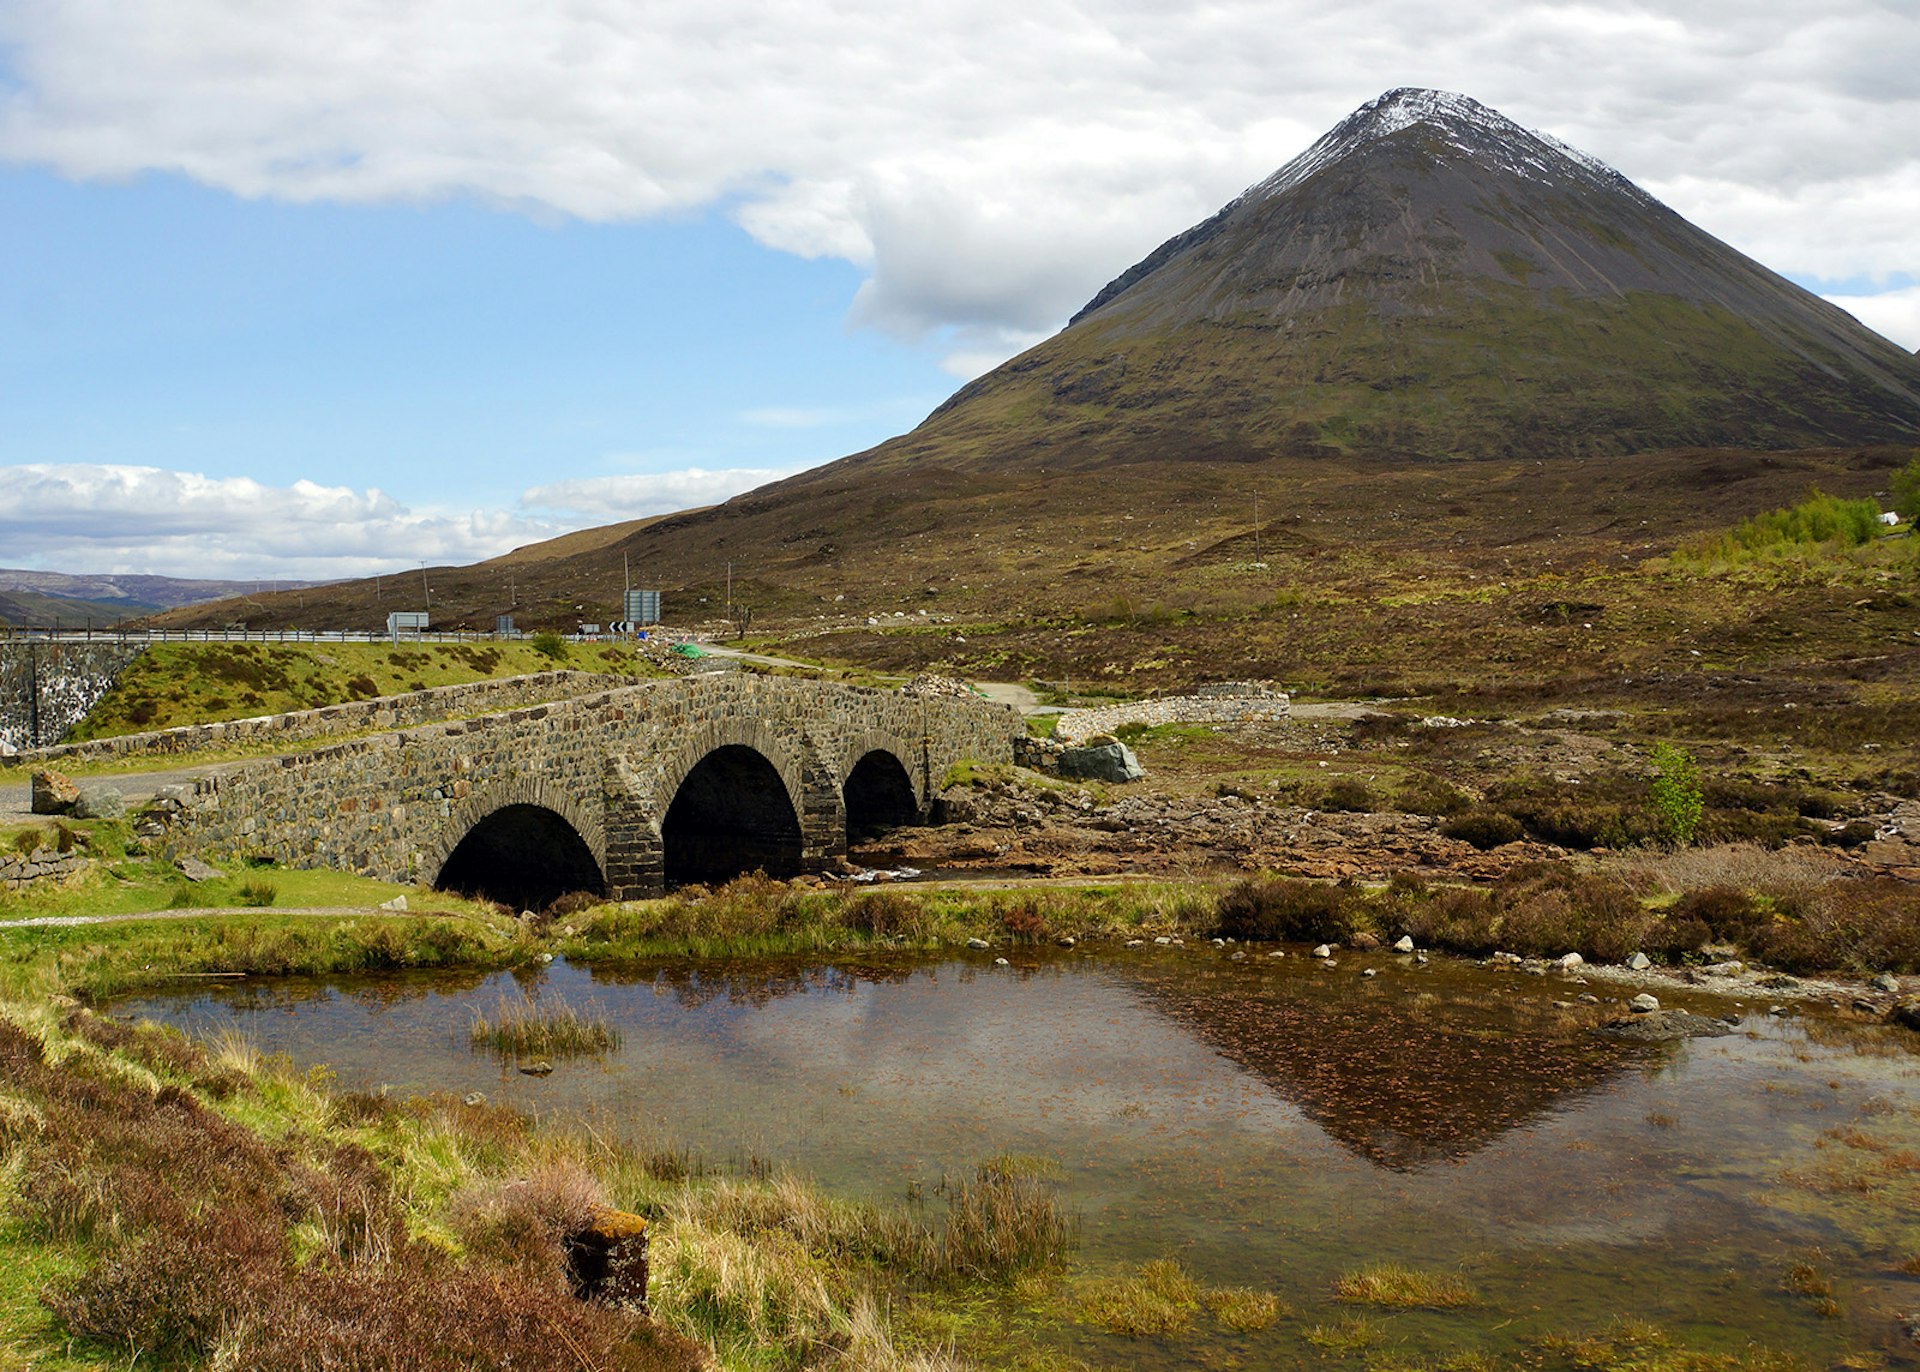 A stone bridge near Sligachan with mountains looming in the background, Isle of Skye © James Kay / Lonely Planet